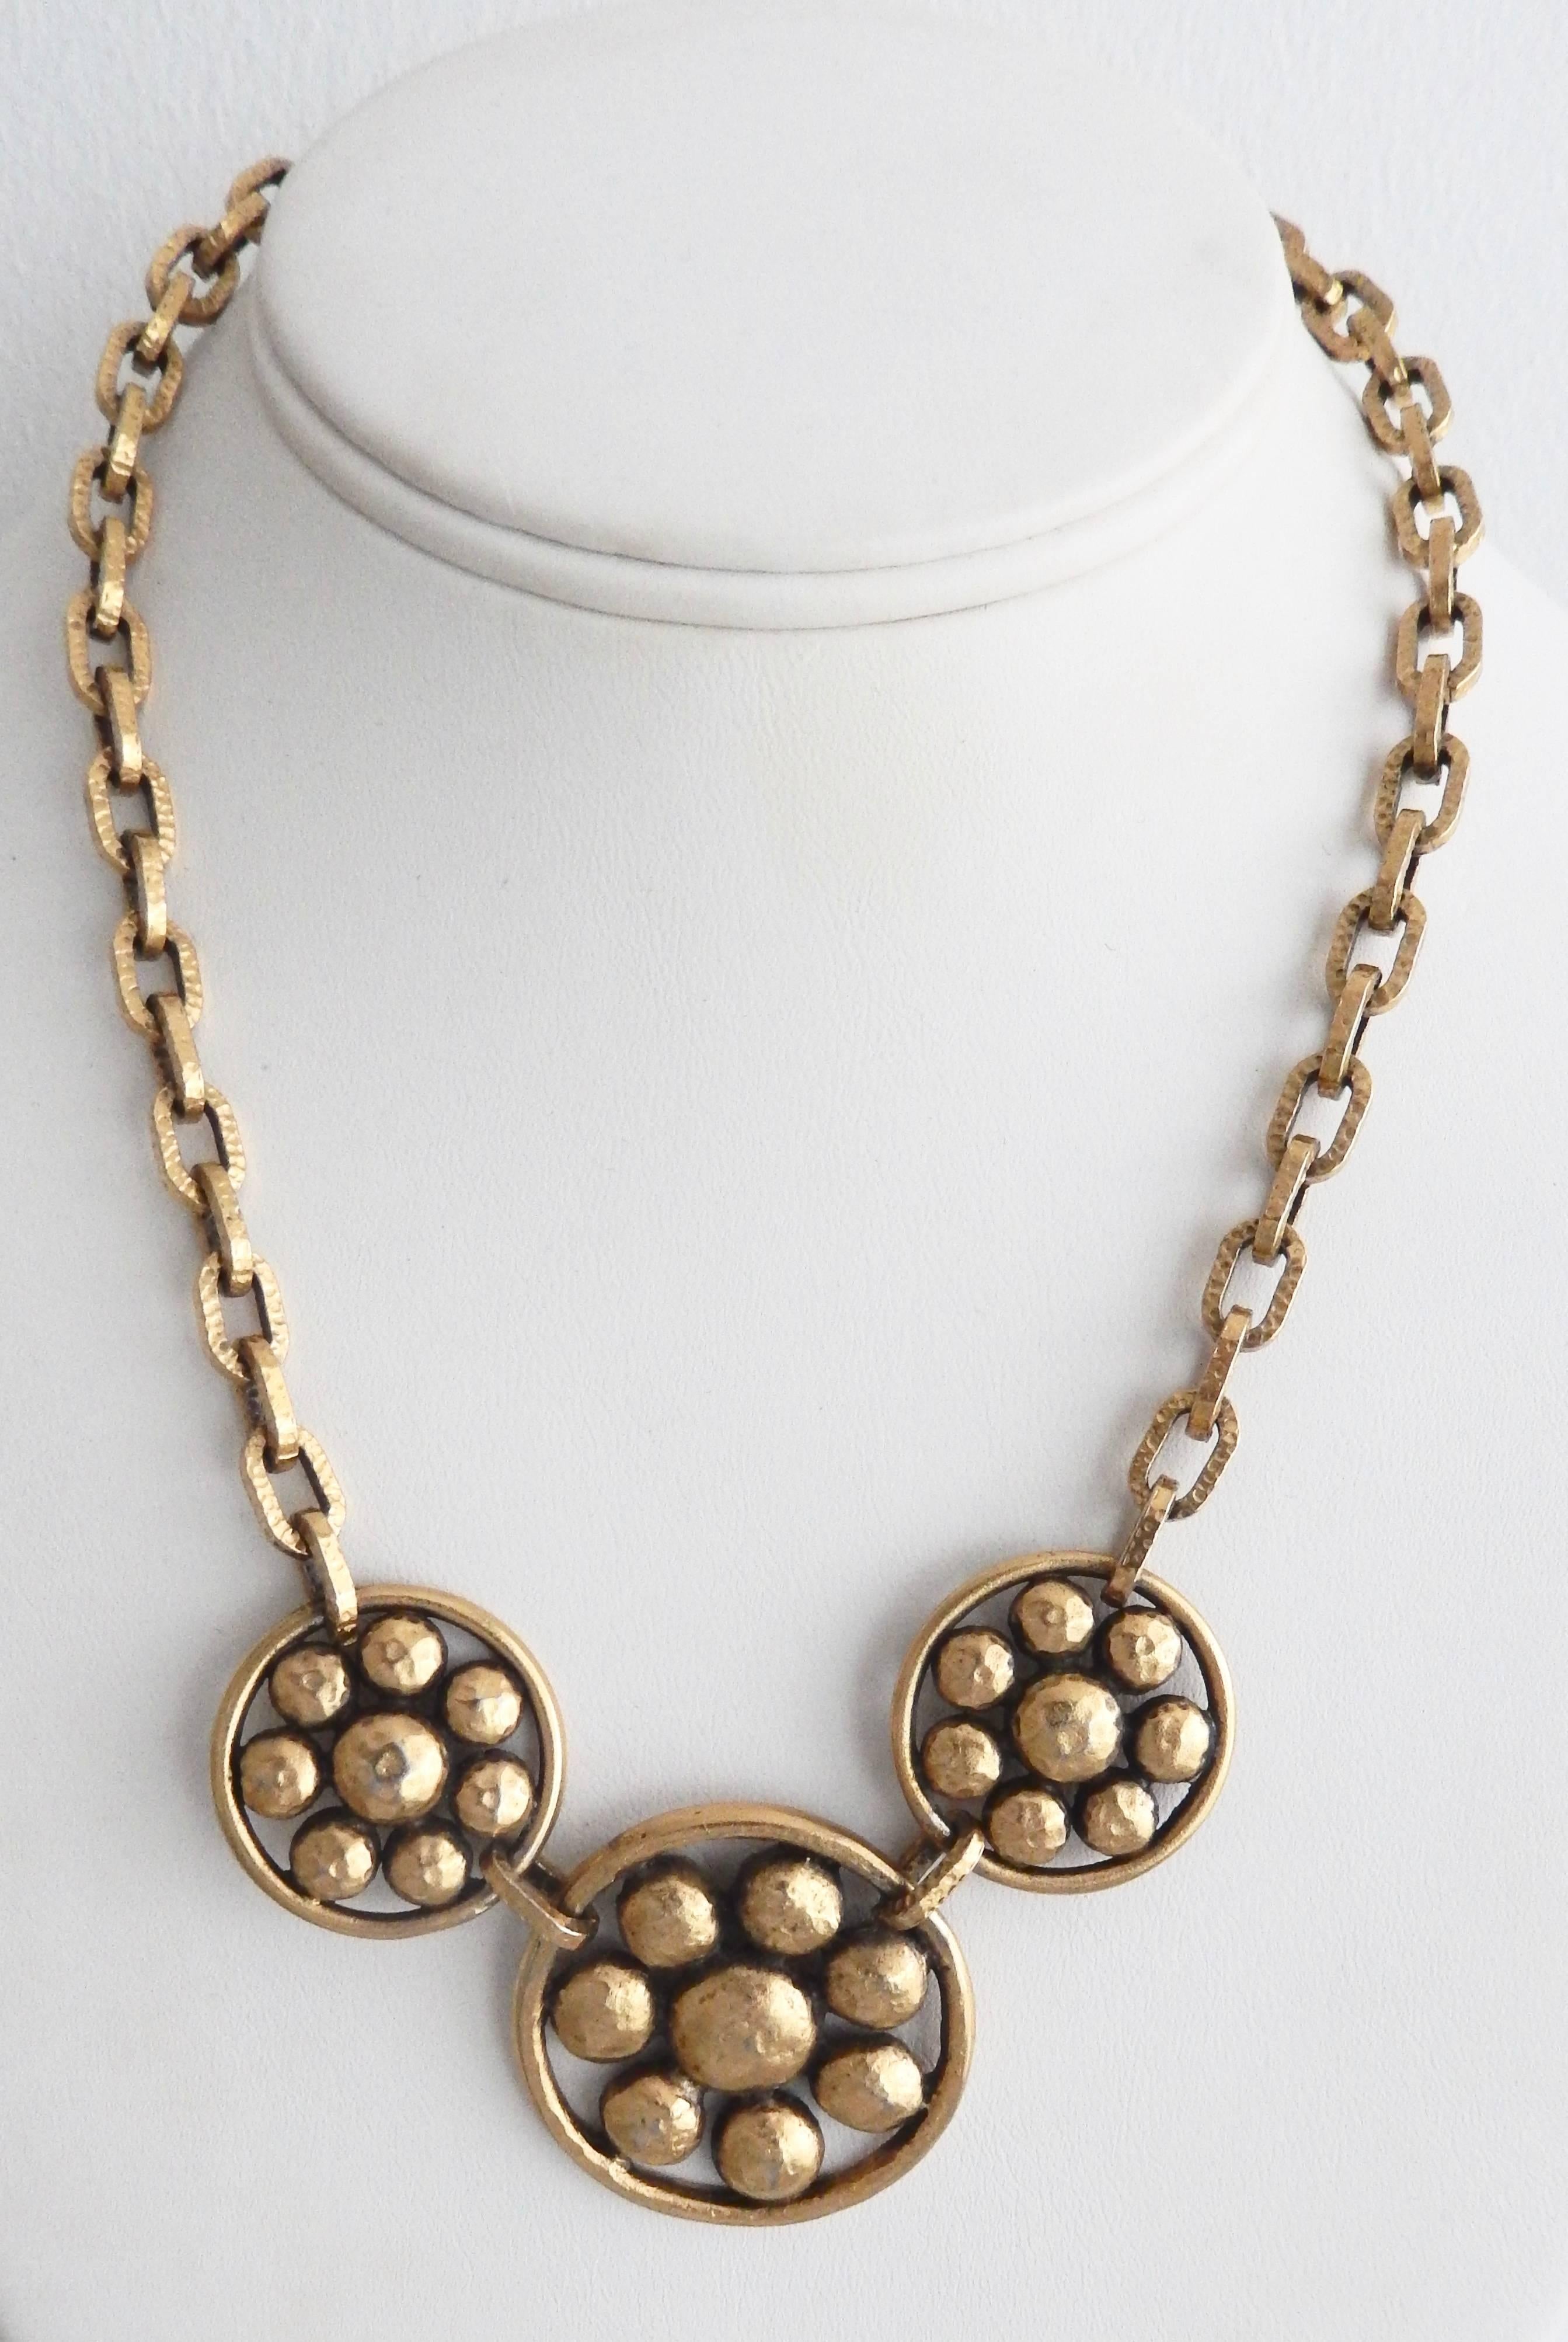 A sophisticated,  gold-toned necklace by Yves Saint Laurent with three stylized floral medallions.  Links have a beautiful, hand-hammered design and detailing.  Marked with inset YSL tag.

Diameter of central medallion:  1  1/2 in